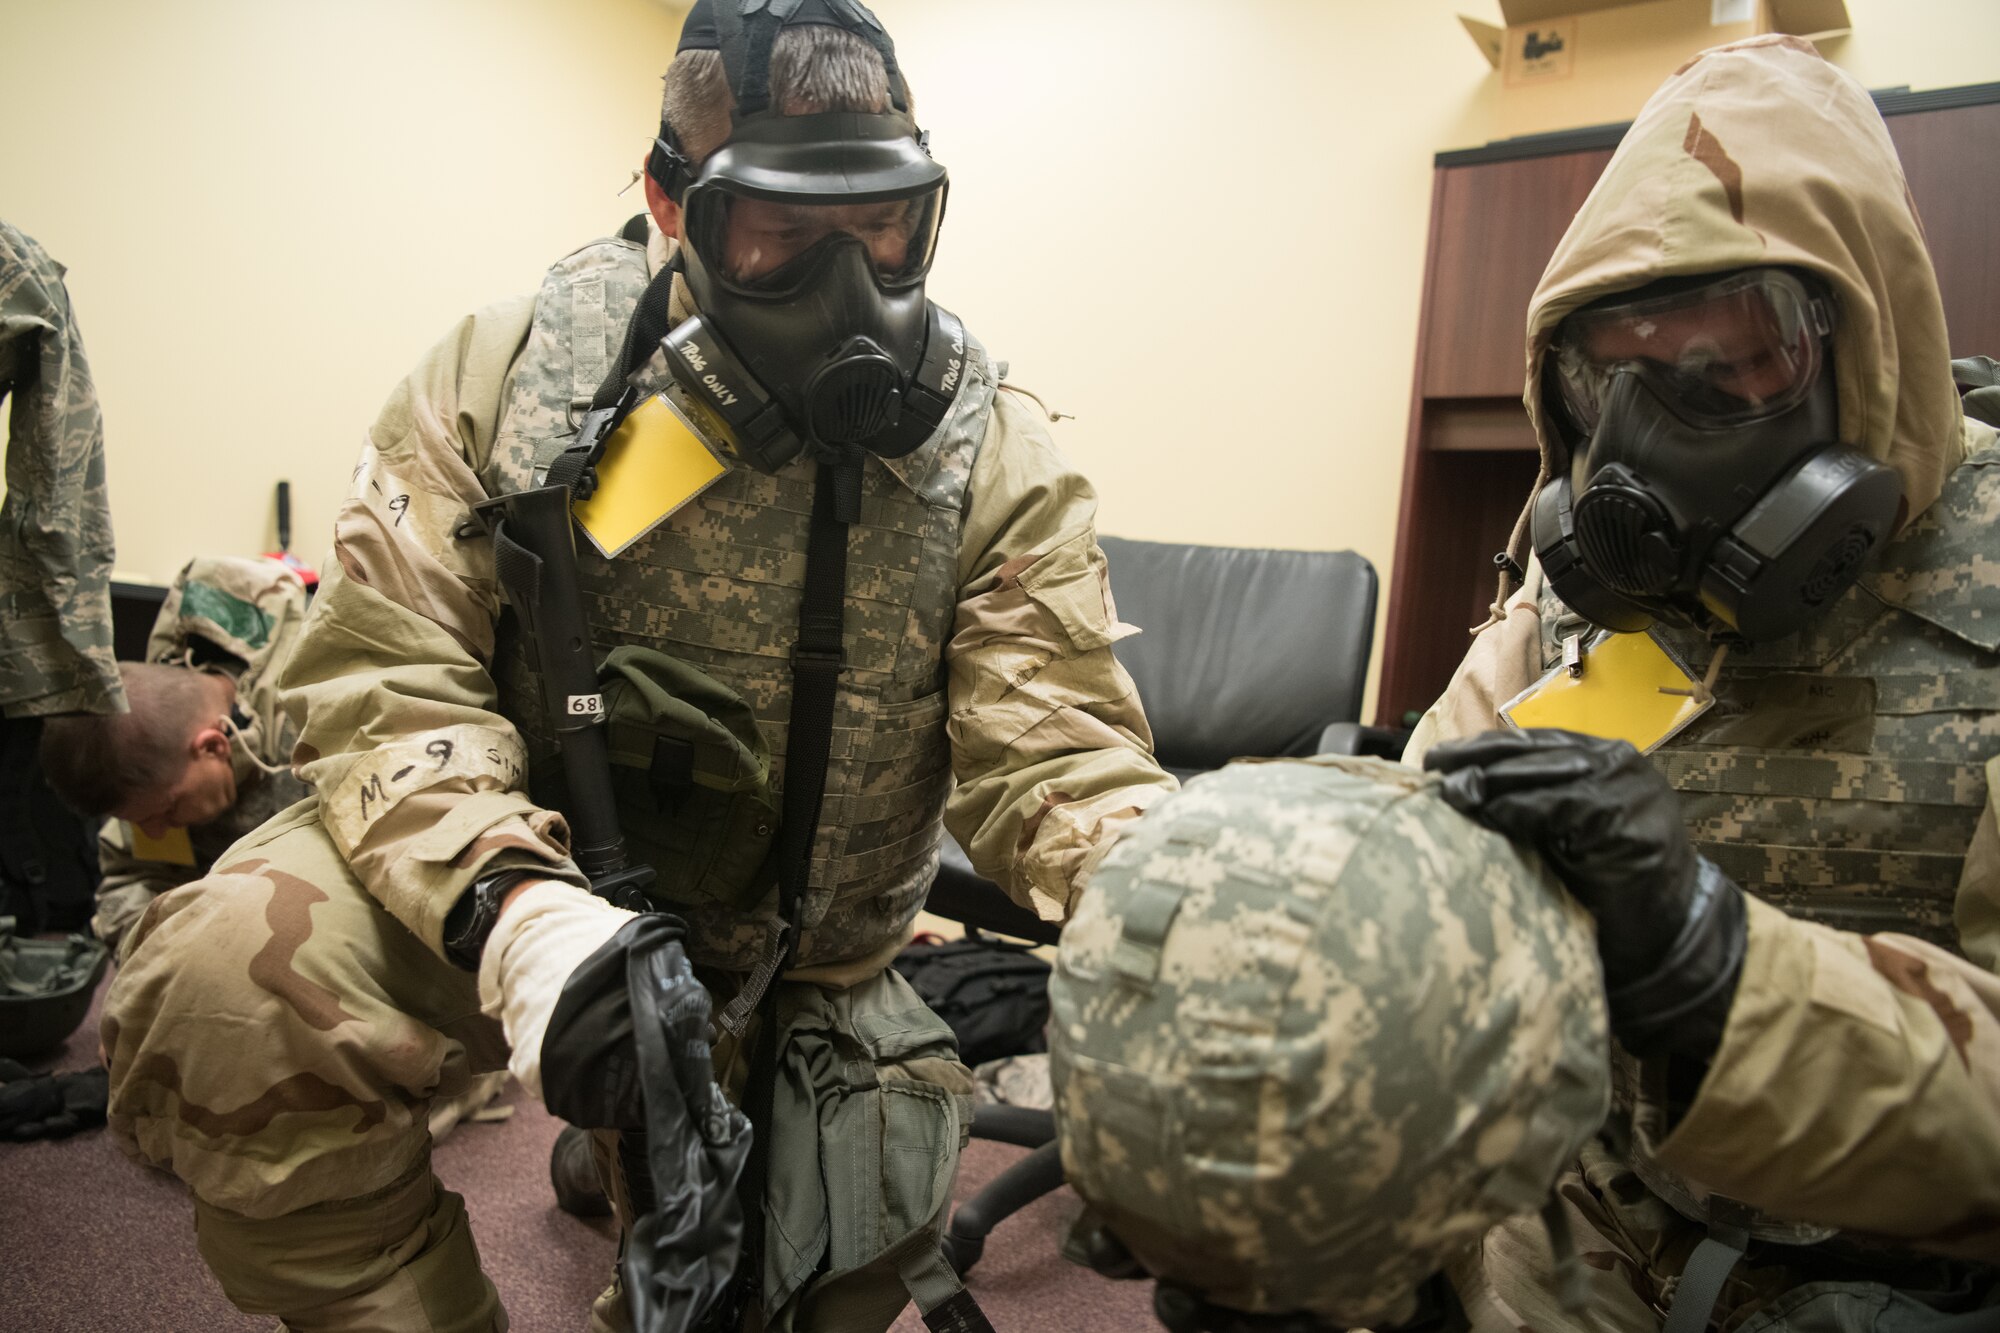 airmen in MOPP gear respond to a simulated threat